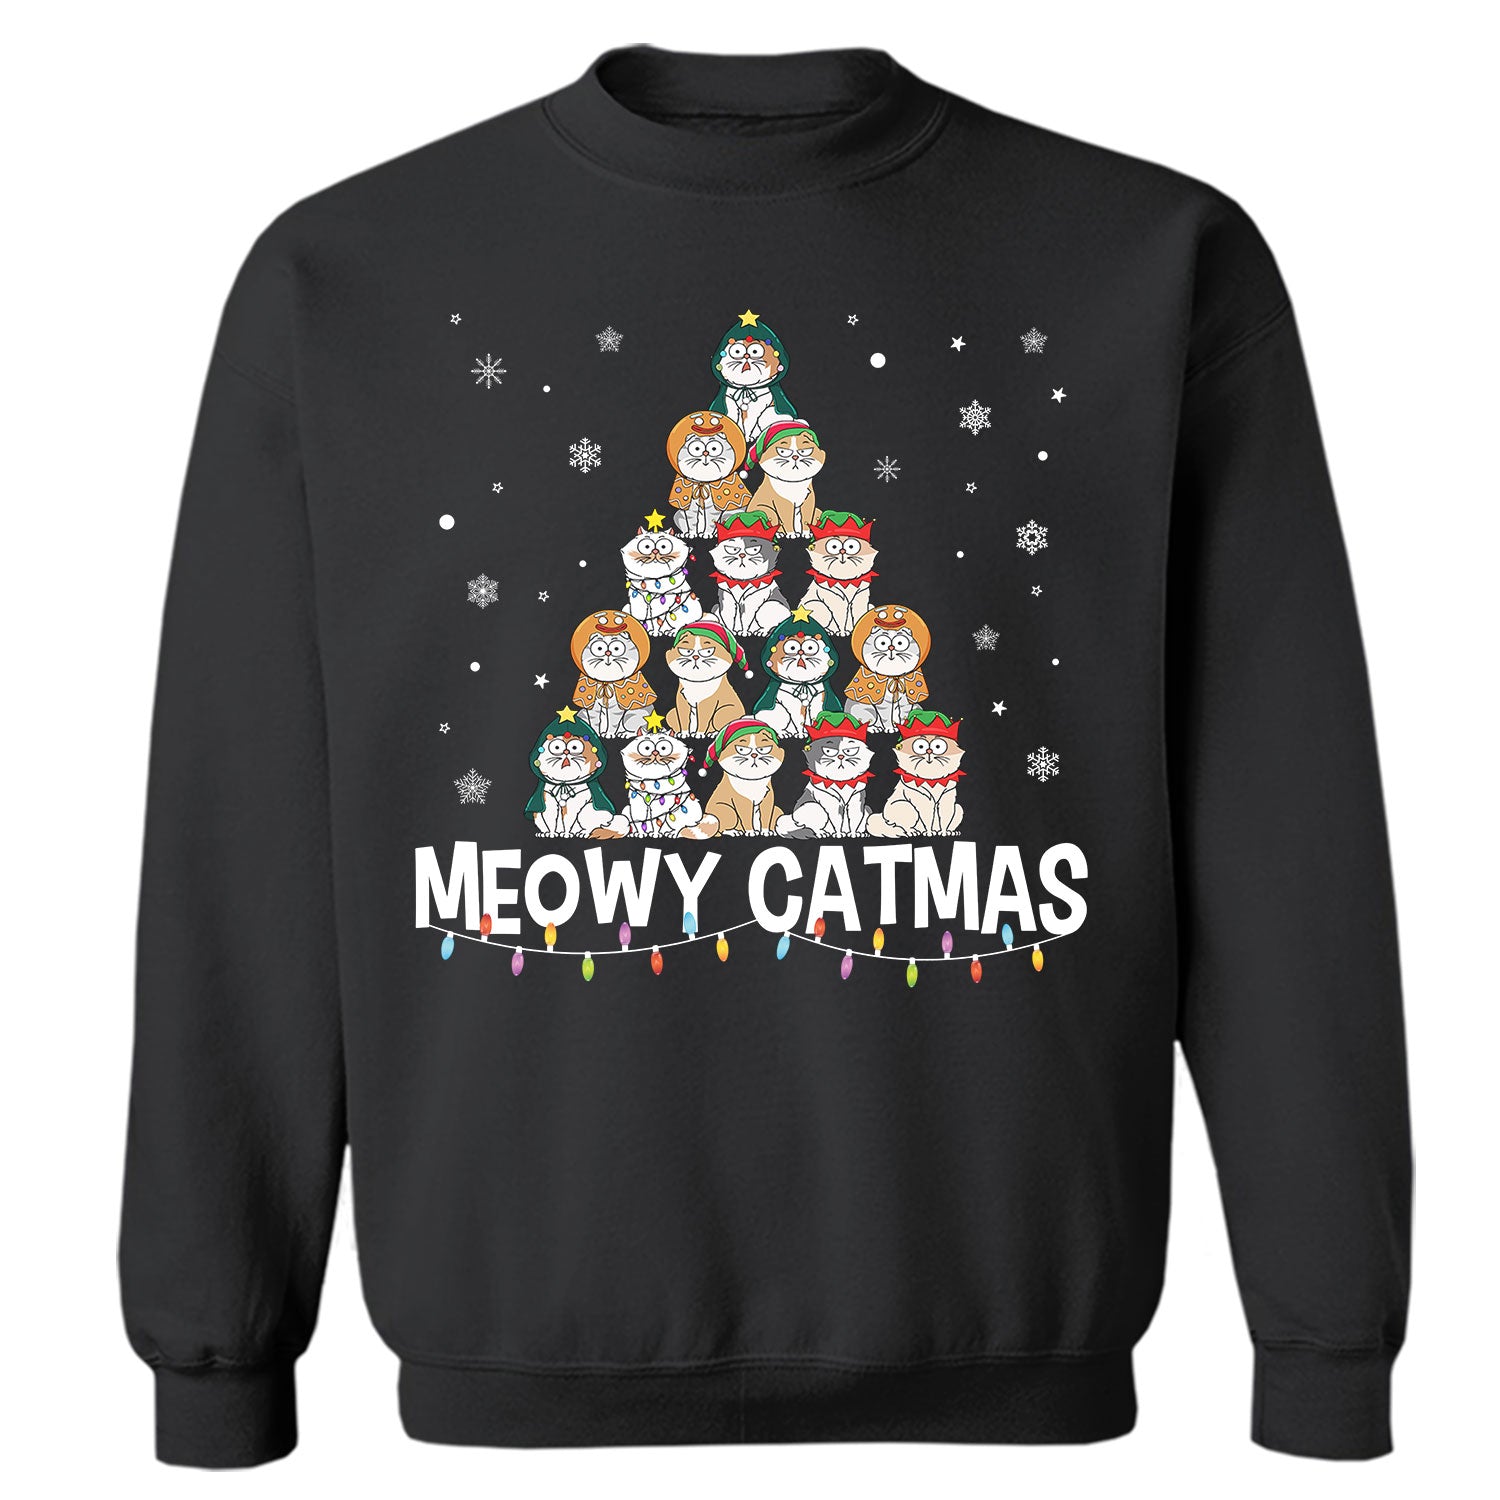 Meowy Catmas Is This Jolly Enough - Christmas Gift For Cat Lovers - Personalized Sweatshirt